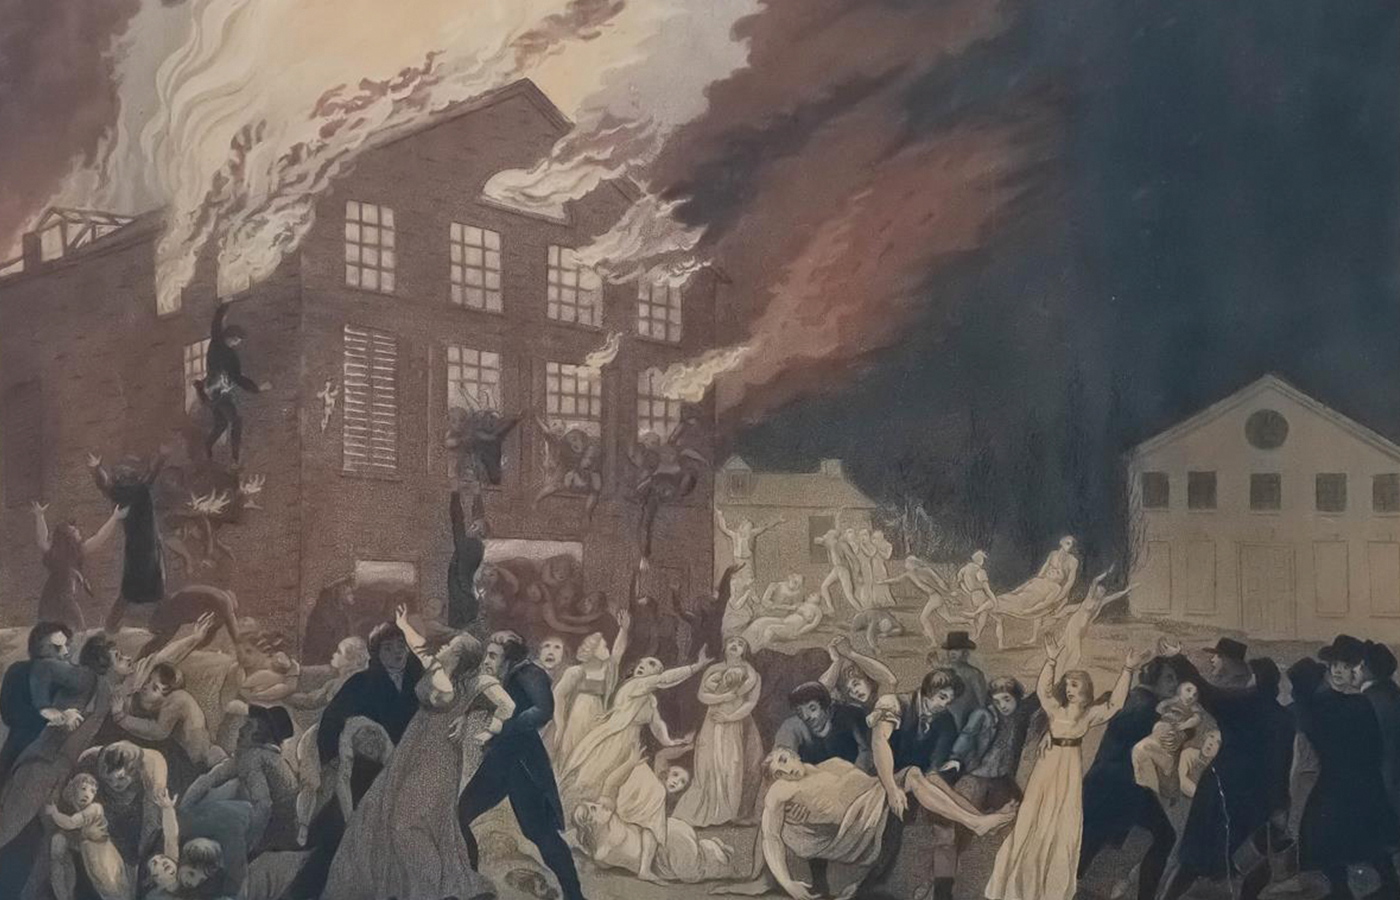 This engraving by Benjamin Tanner from February 1812 depicts the Richmond Theatre fire.